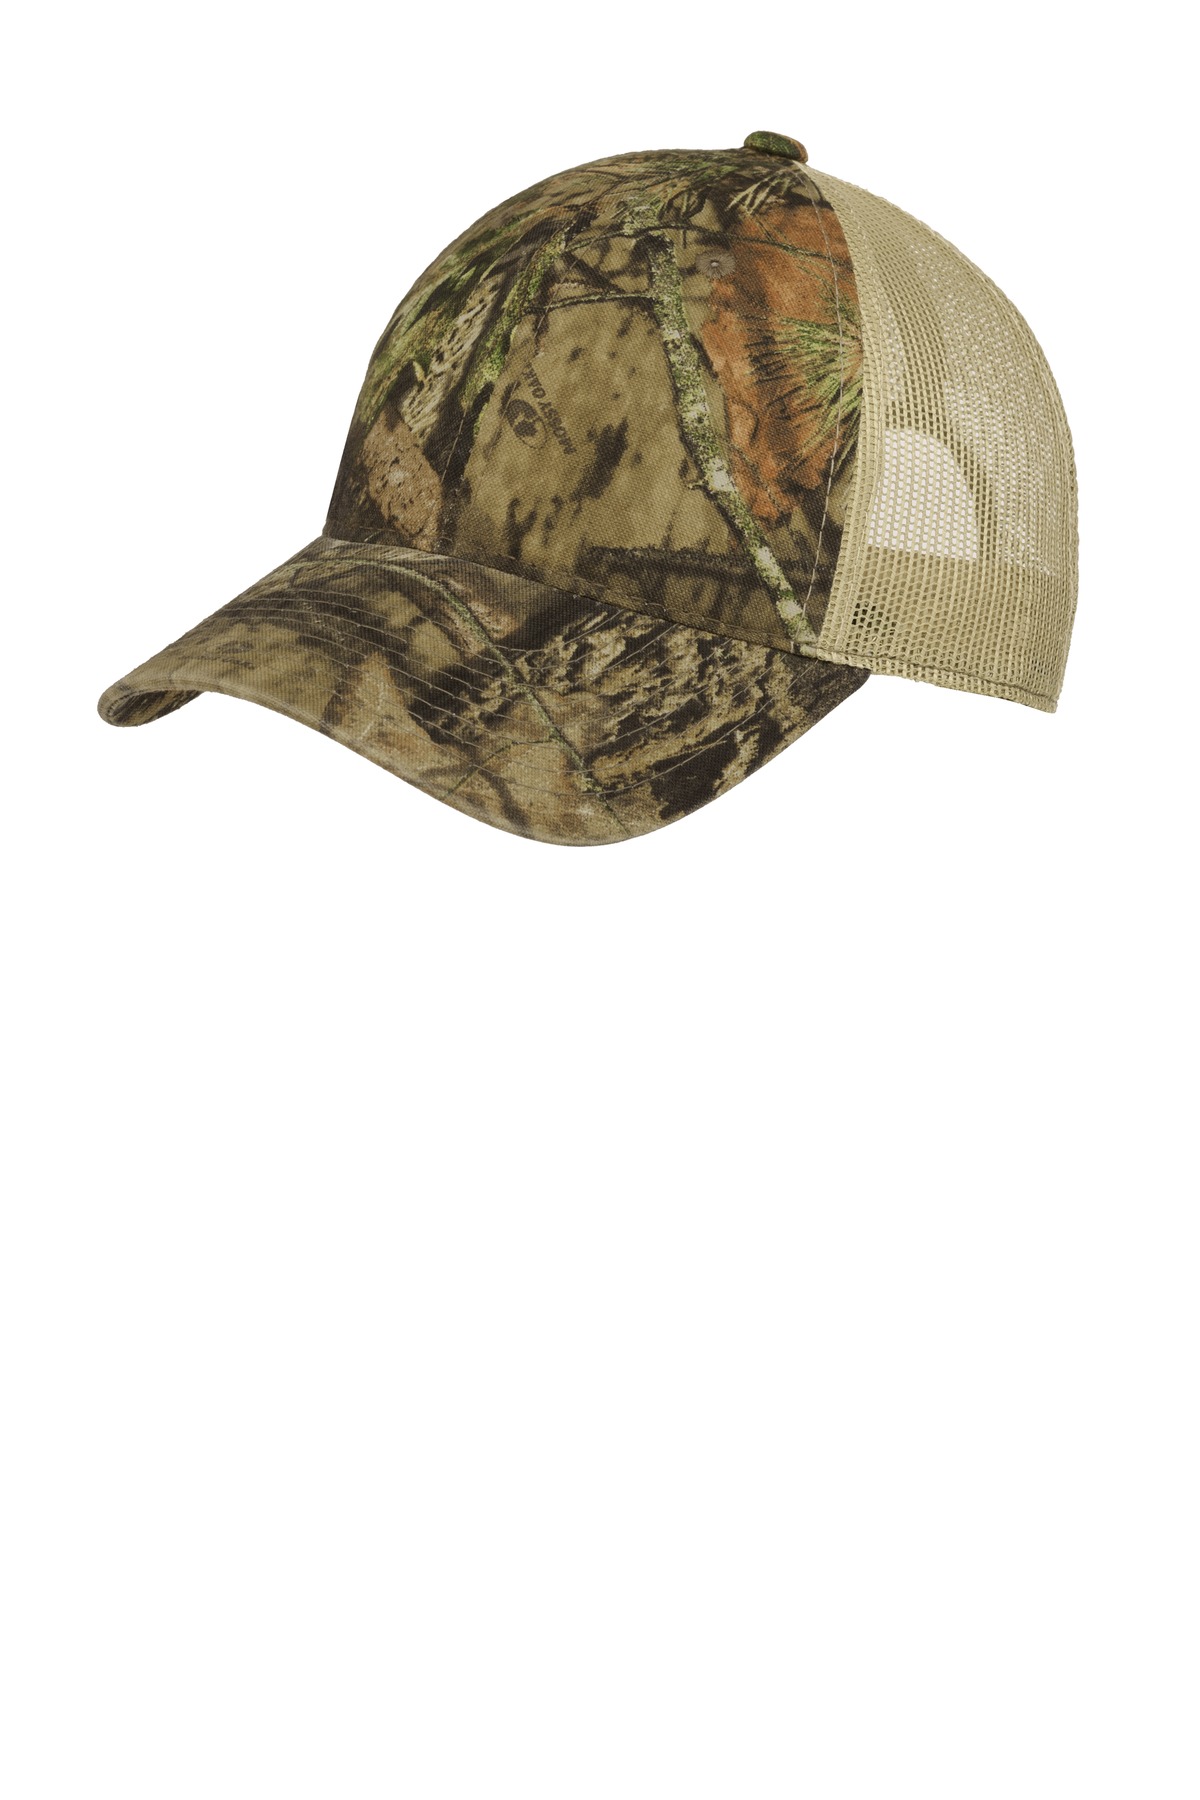 Port Authority Unstructured Camouflage Mesh Back Cap-Port Authority